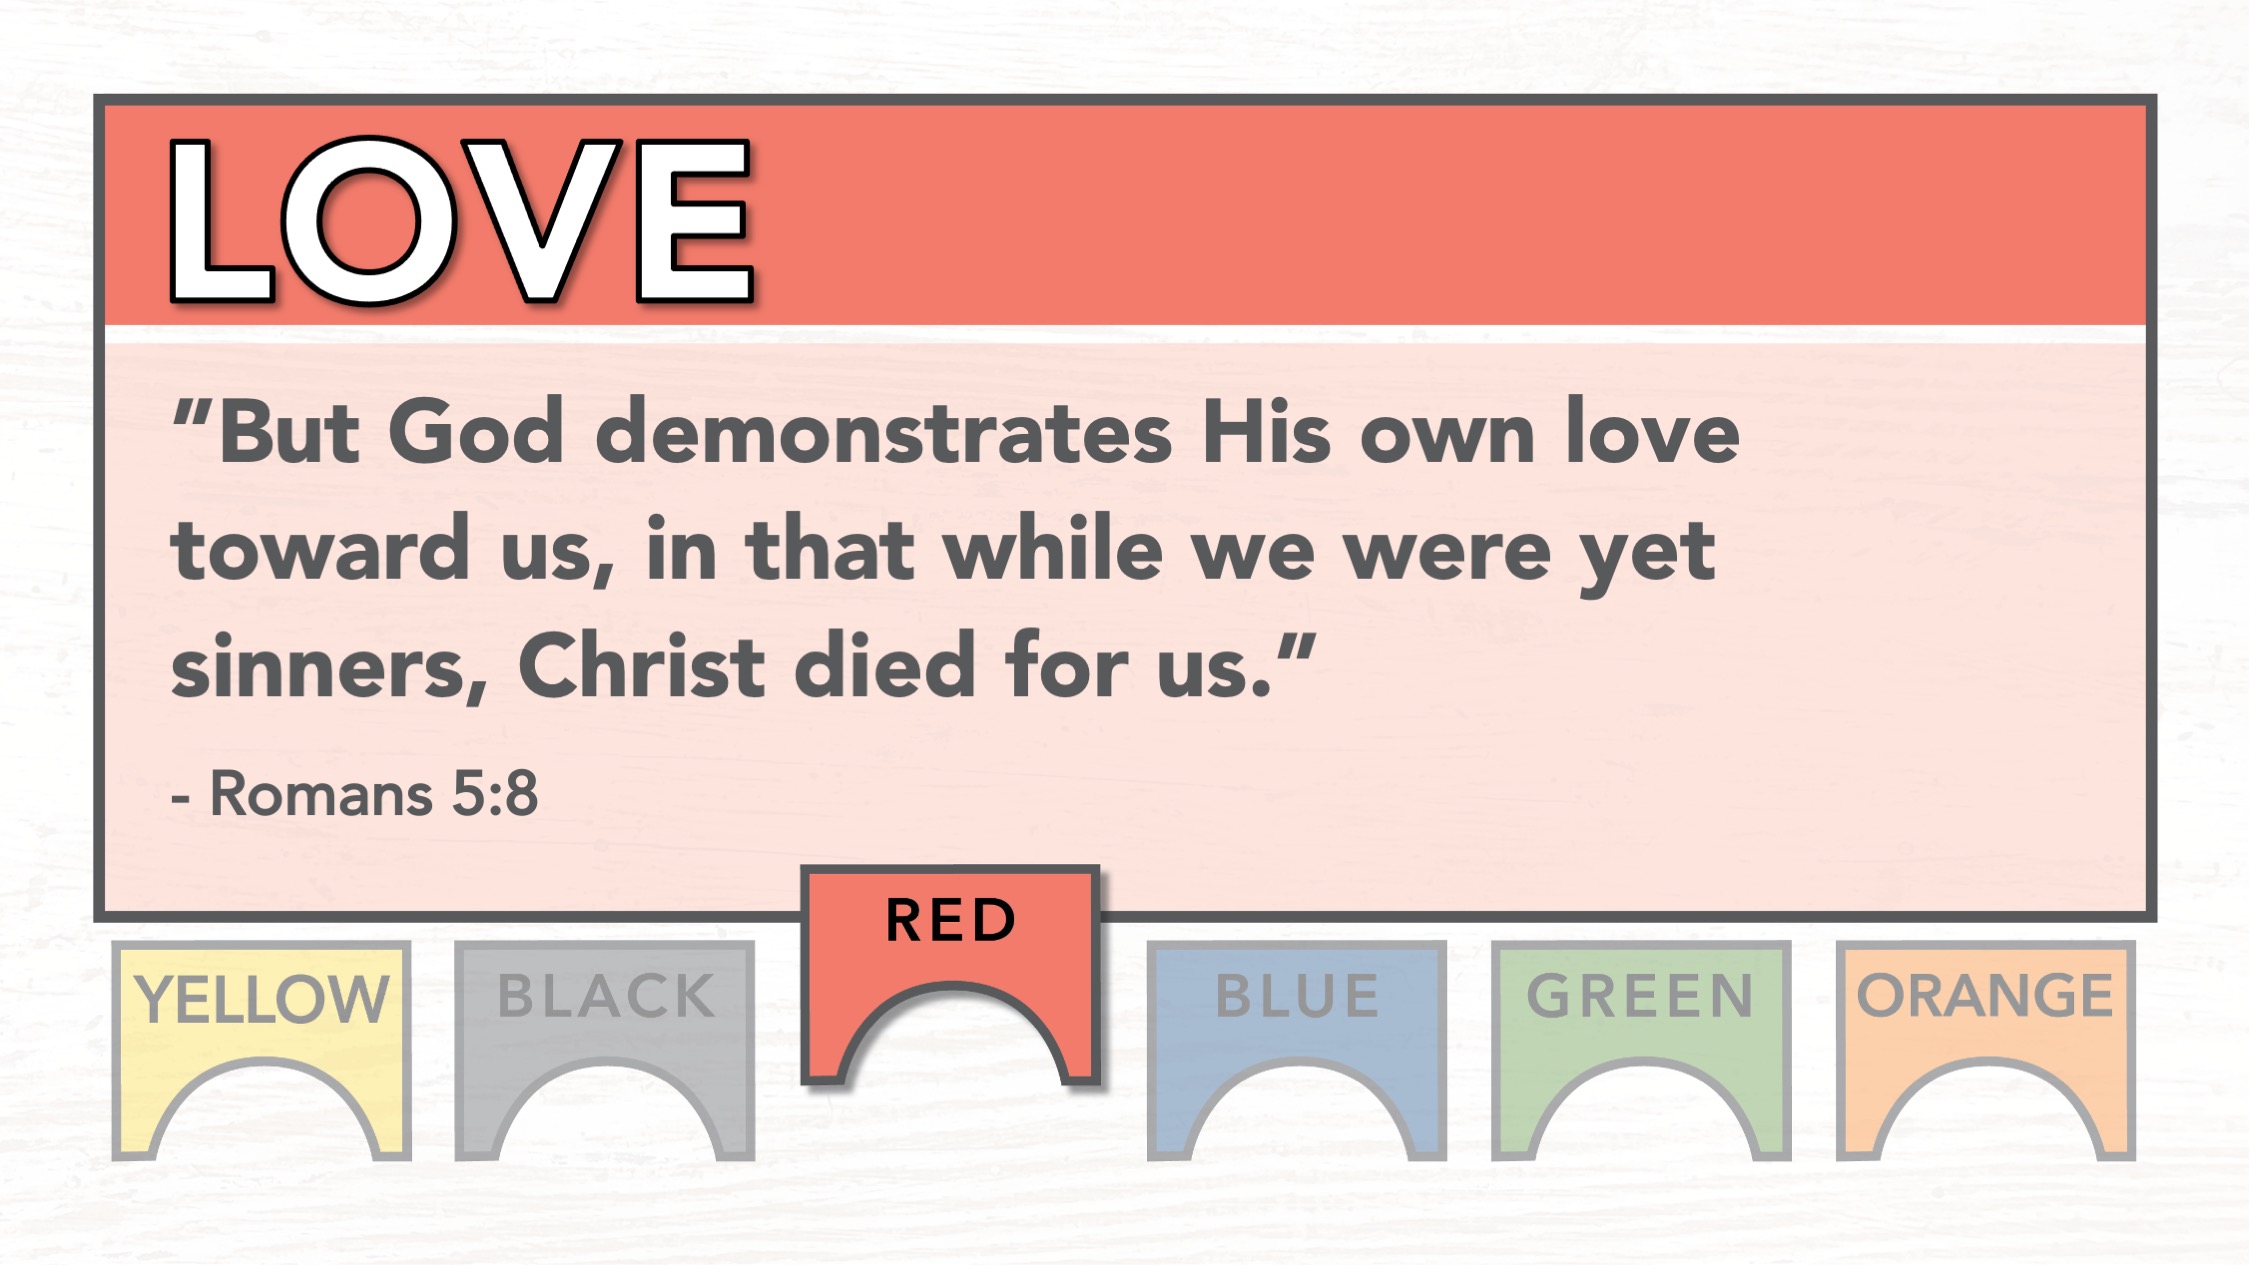 Red - Love: "But God demonstrates His own love toward us, in that while we were yet sinners, Christ died for us." Romans 5:8